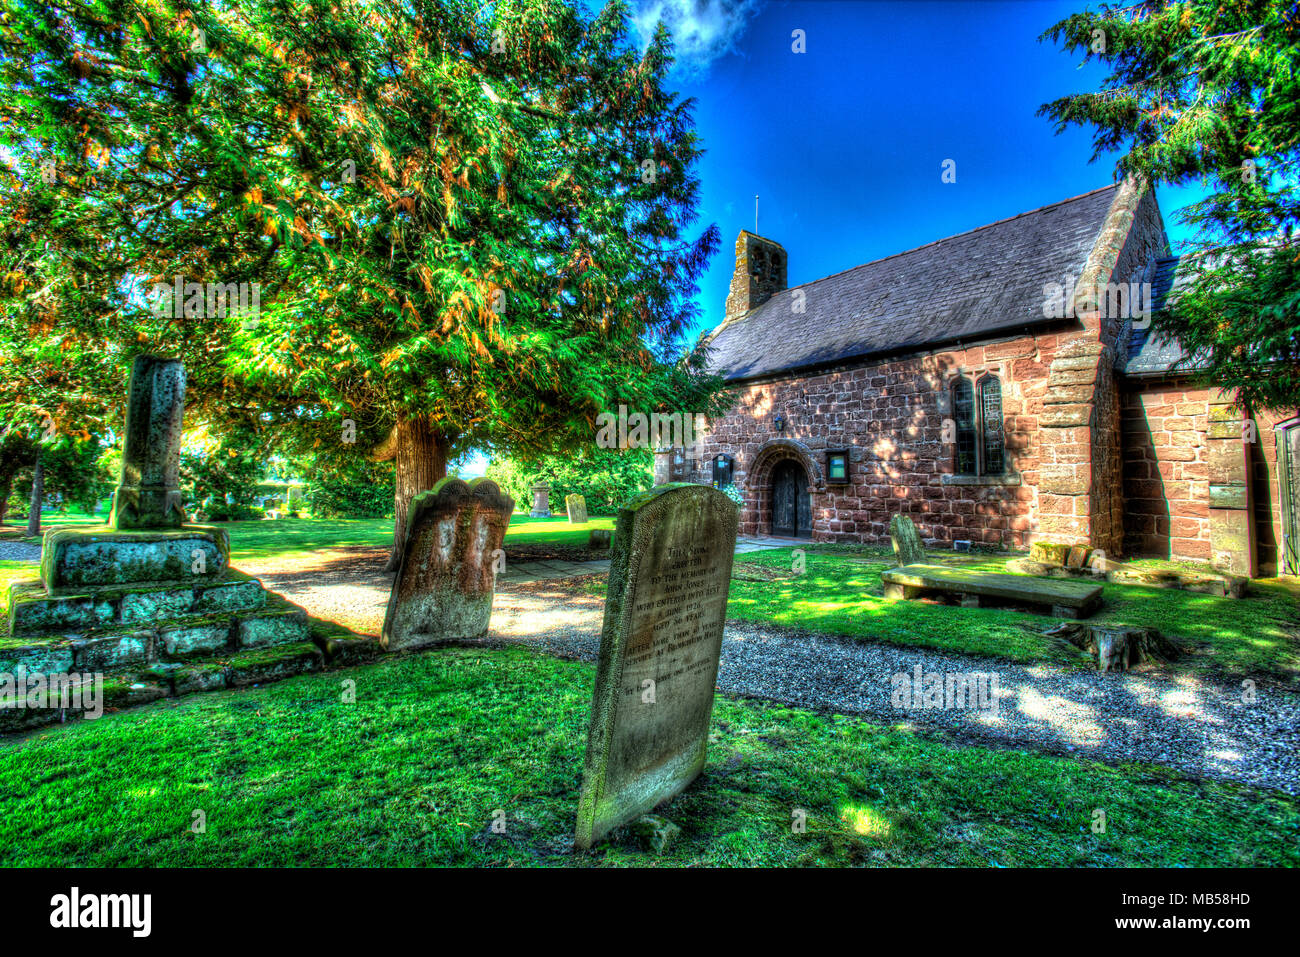 Village of Shocklach, Cheshire, England. Artistic dusk view the Grade I listed St Edith's Church. Stock Photo